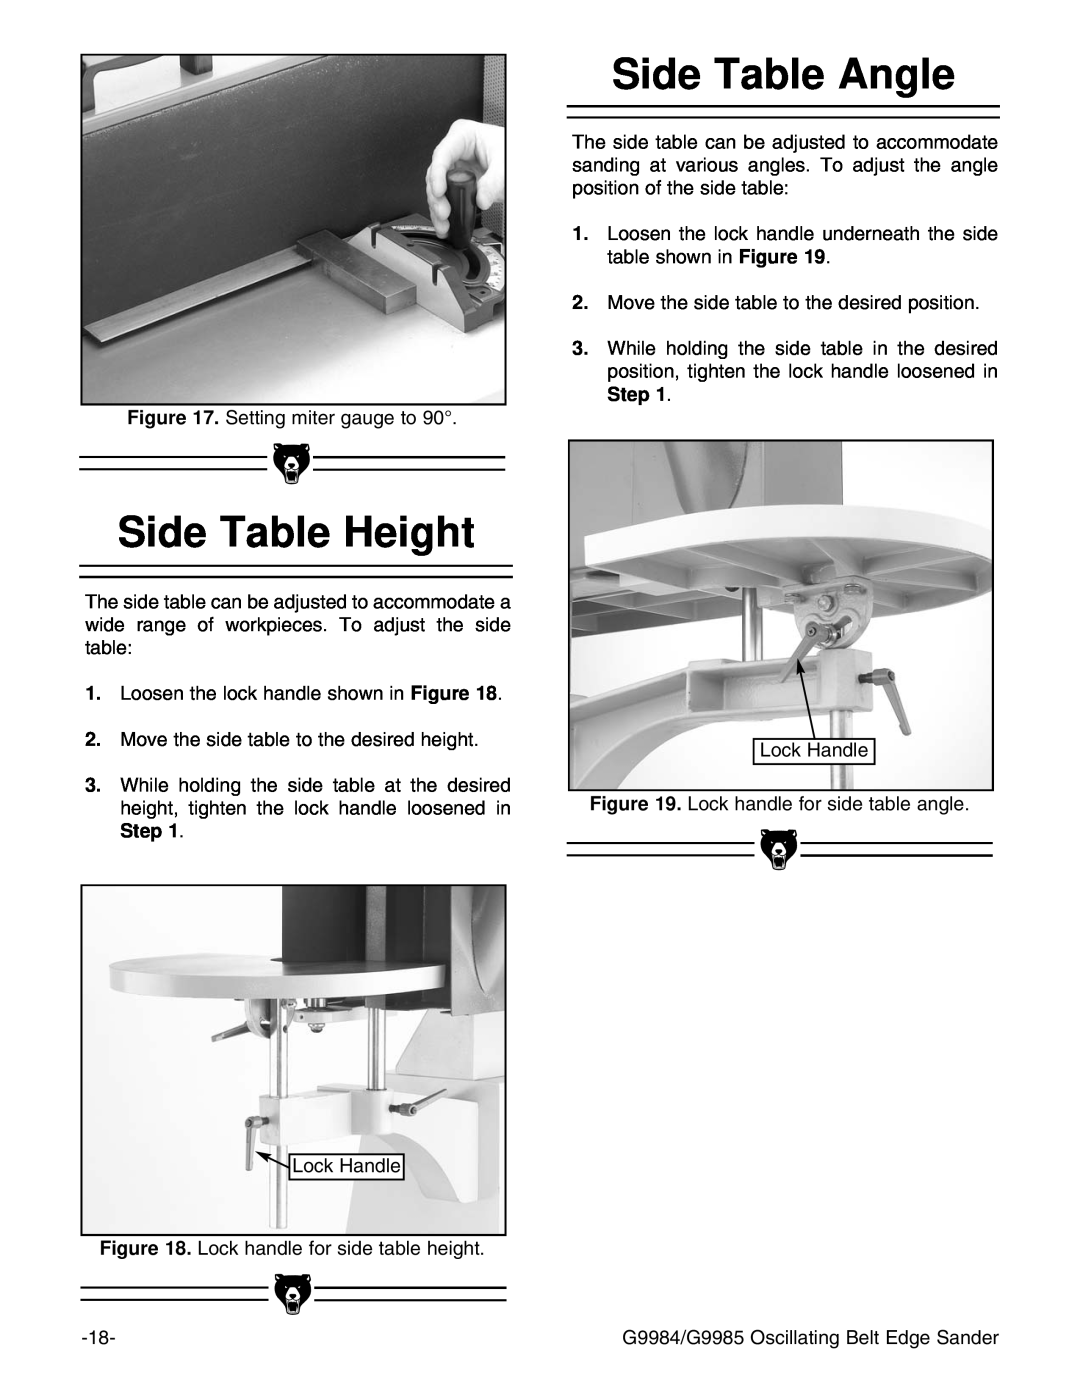 Grizzly G9984, G9985 instruction manual Side Table Angle, Side Table Height 